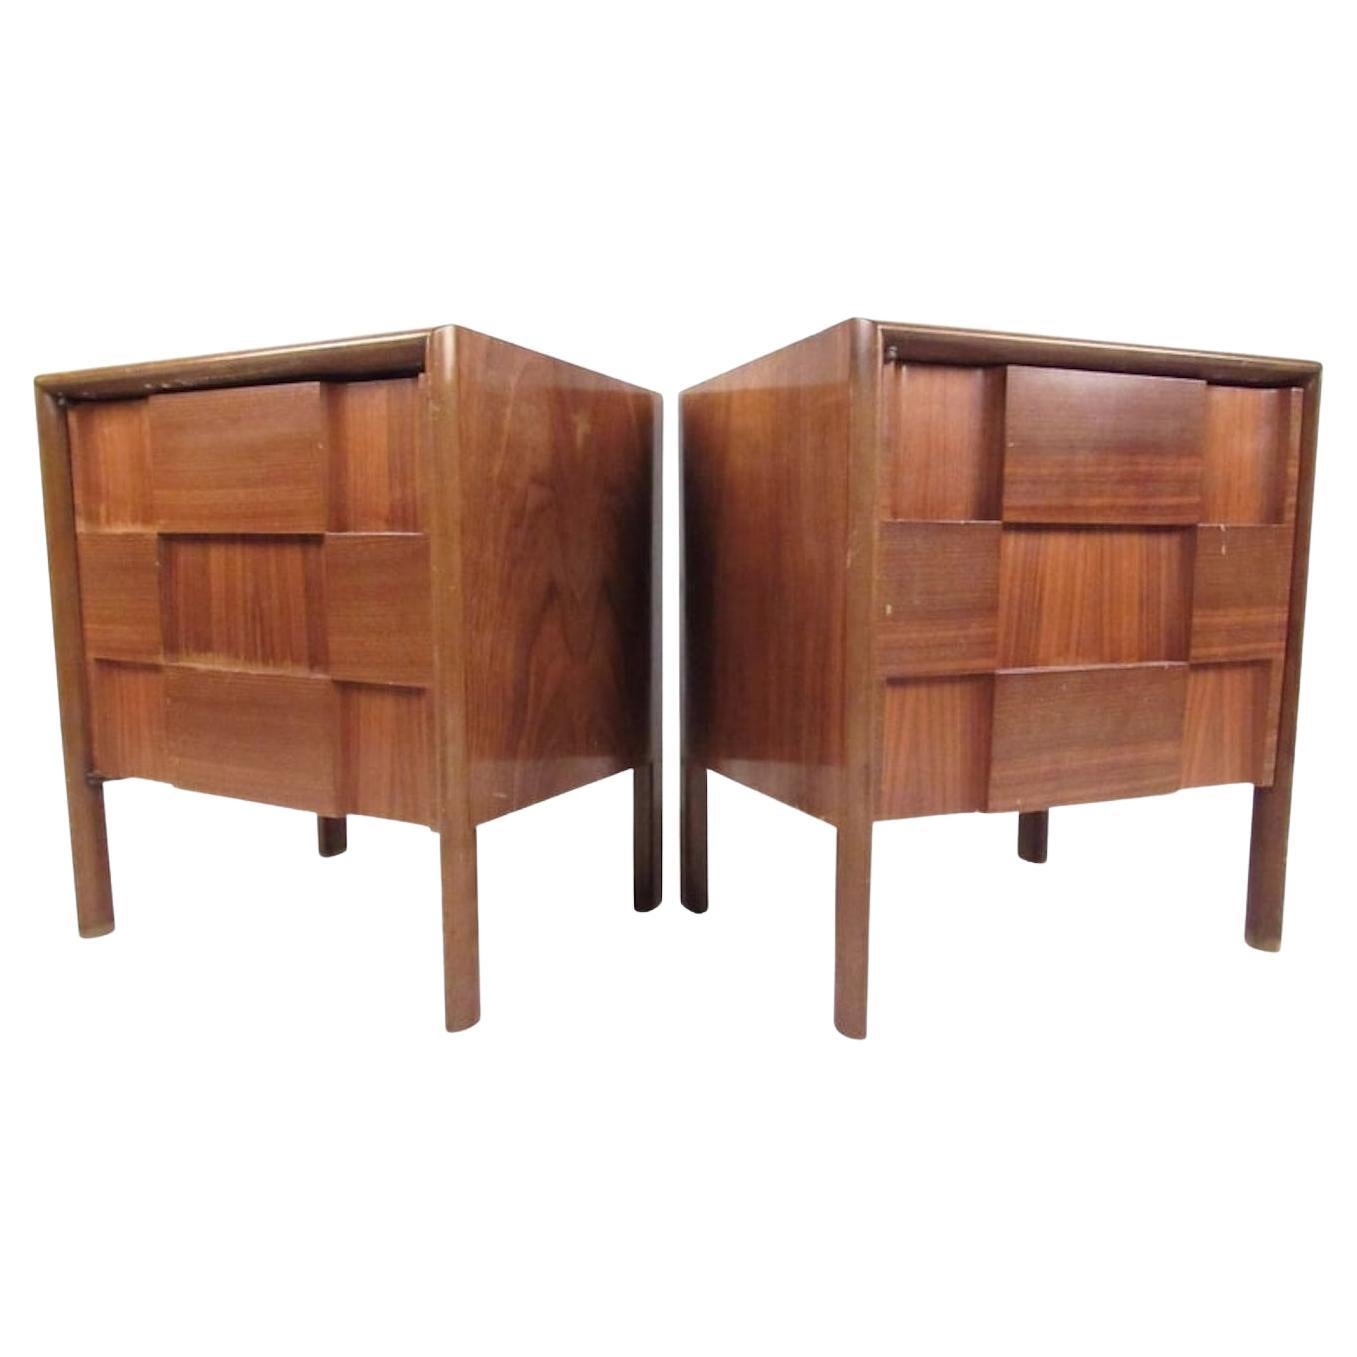 Pair of Edmond Spence "Checkerboard" Nightstands For Sale